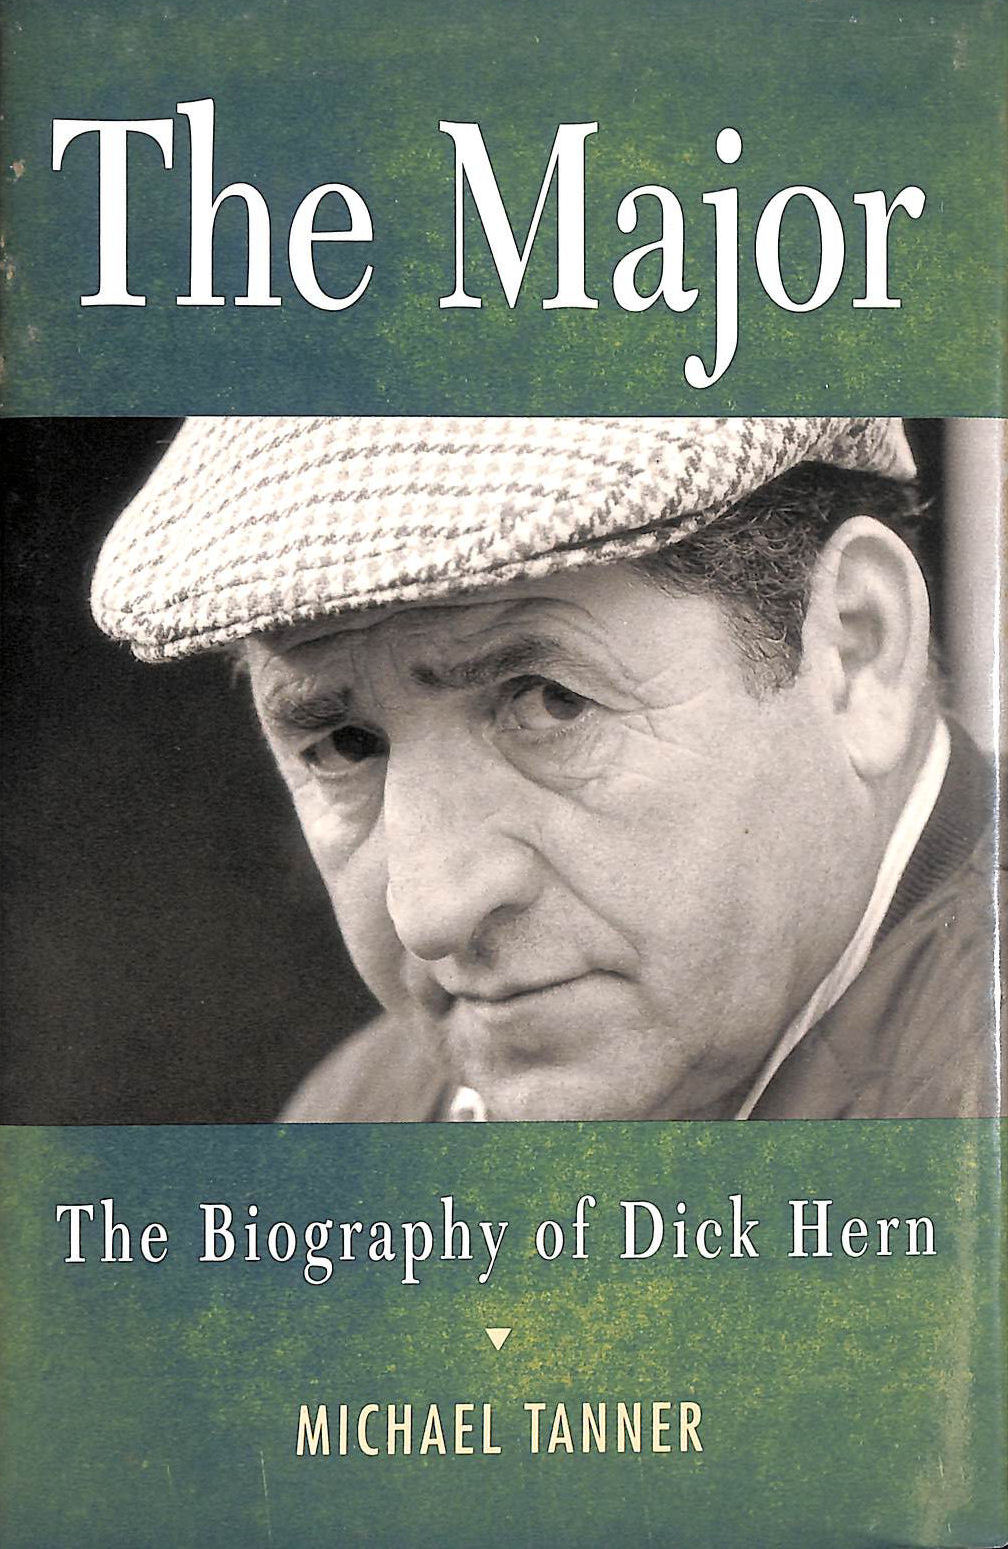 TANNER, MICHAEL - The Major: The Biography of Dick Hern